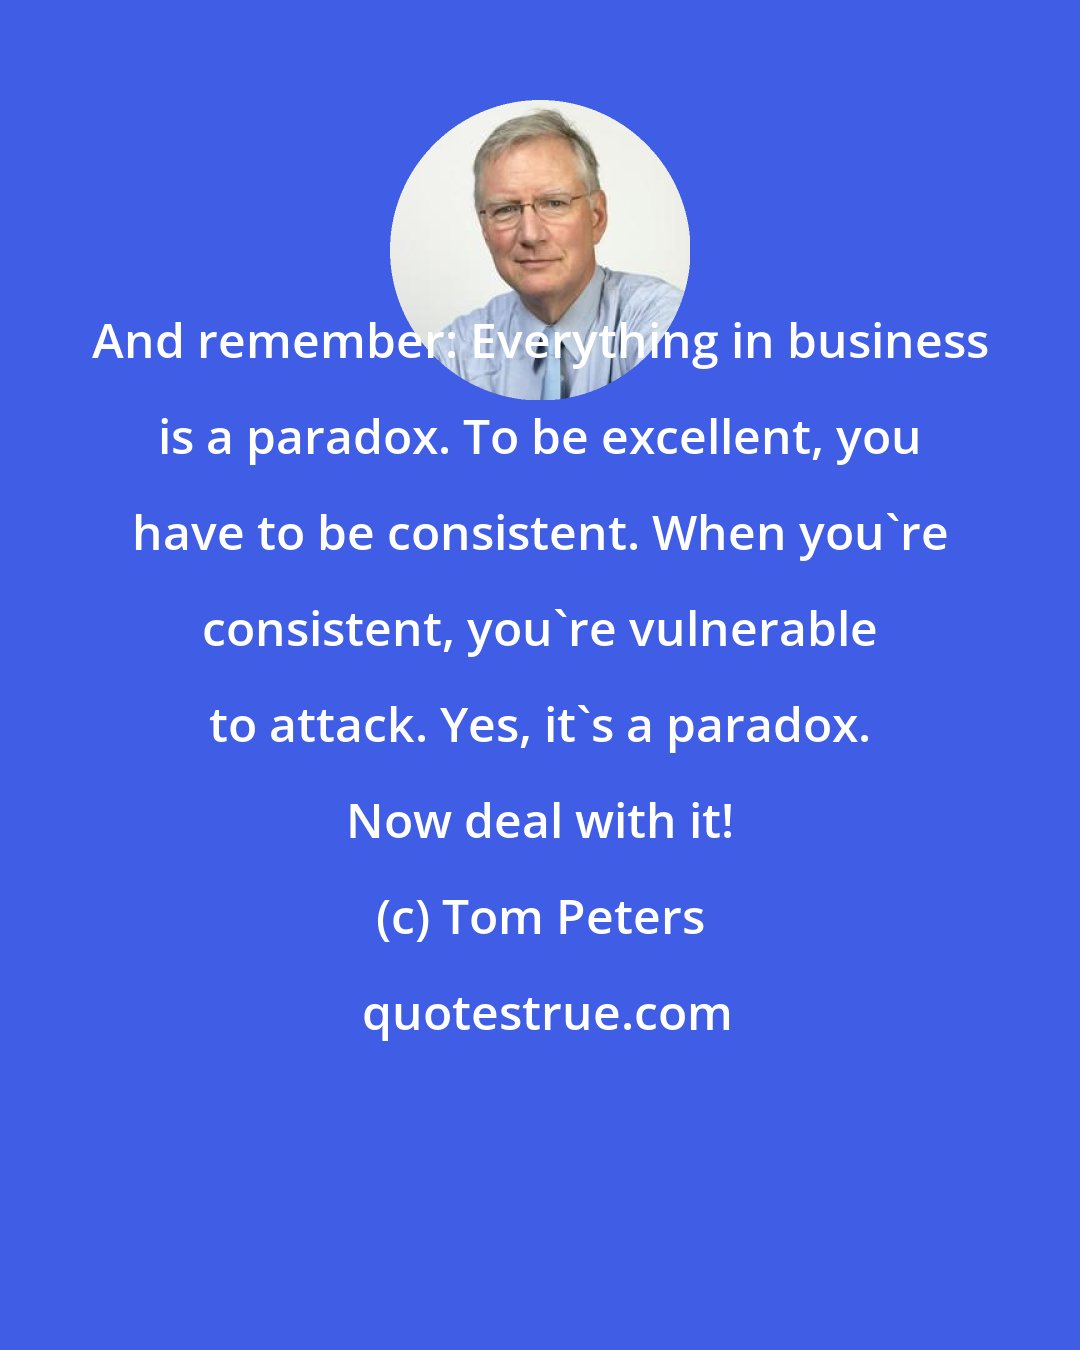 Tom Peters: And remember: Everything in business is a paradox. To be excellent, you have to be consistent. When you're consistent, you're vulnerable to attack. Yes, it's a paradox. Now deal with it!